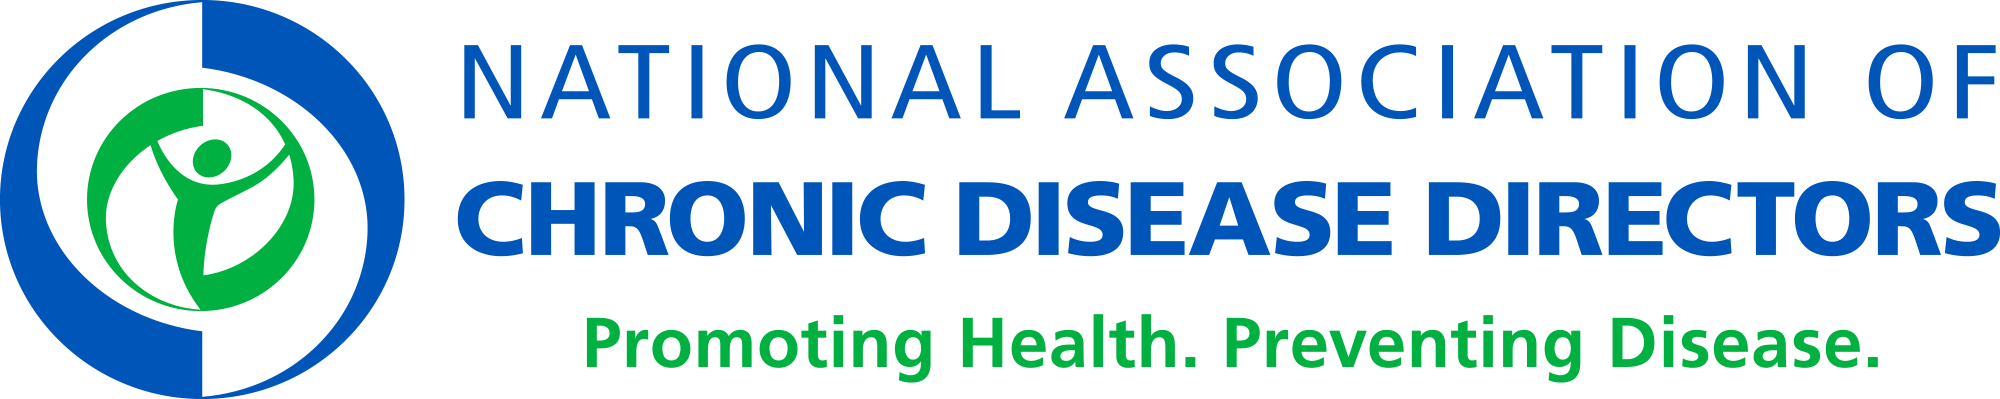 National Association of Chronic Disease Directors, Promoting Health, Preventing Disease